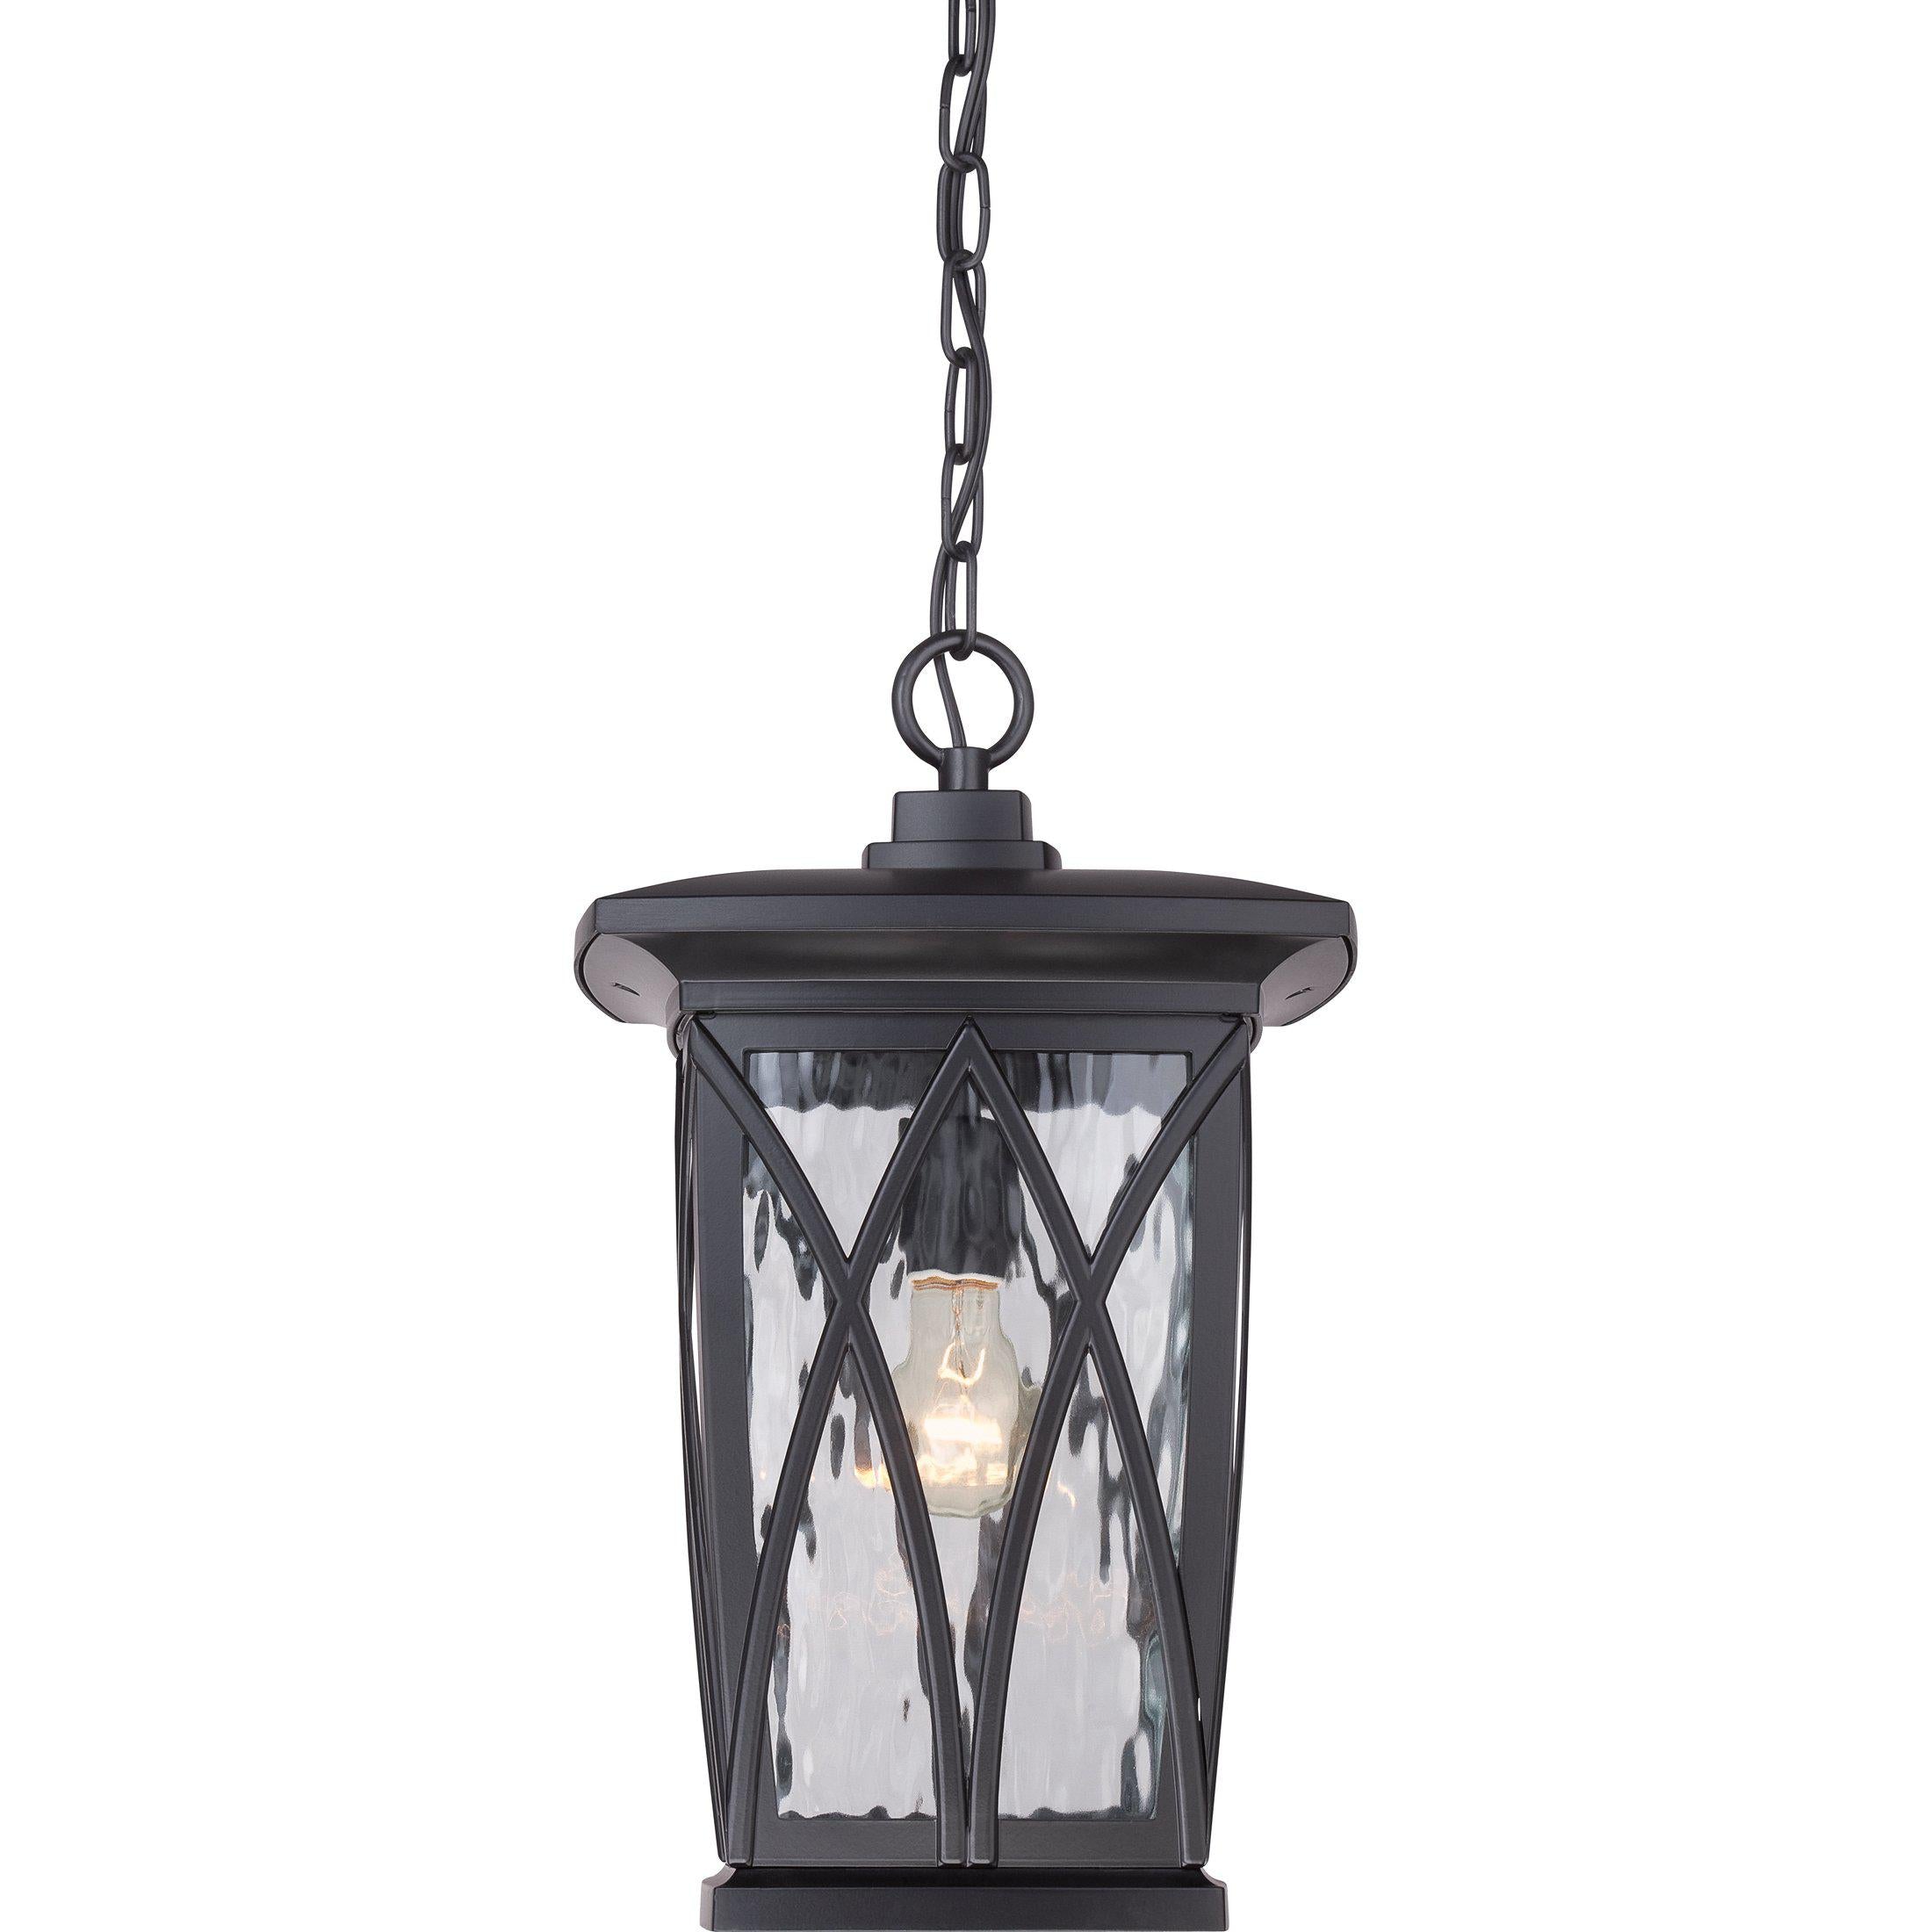 Quoizel Grover Outdoor Lantern, Hanging